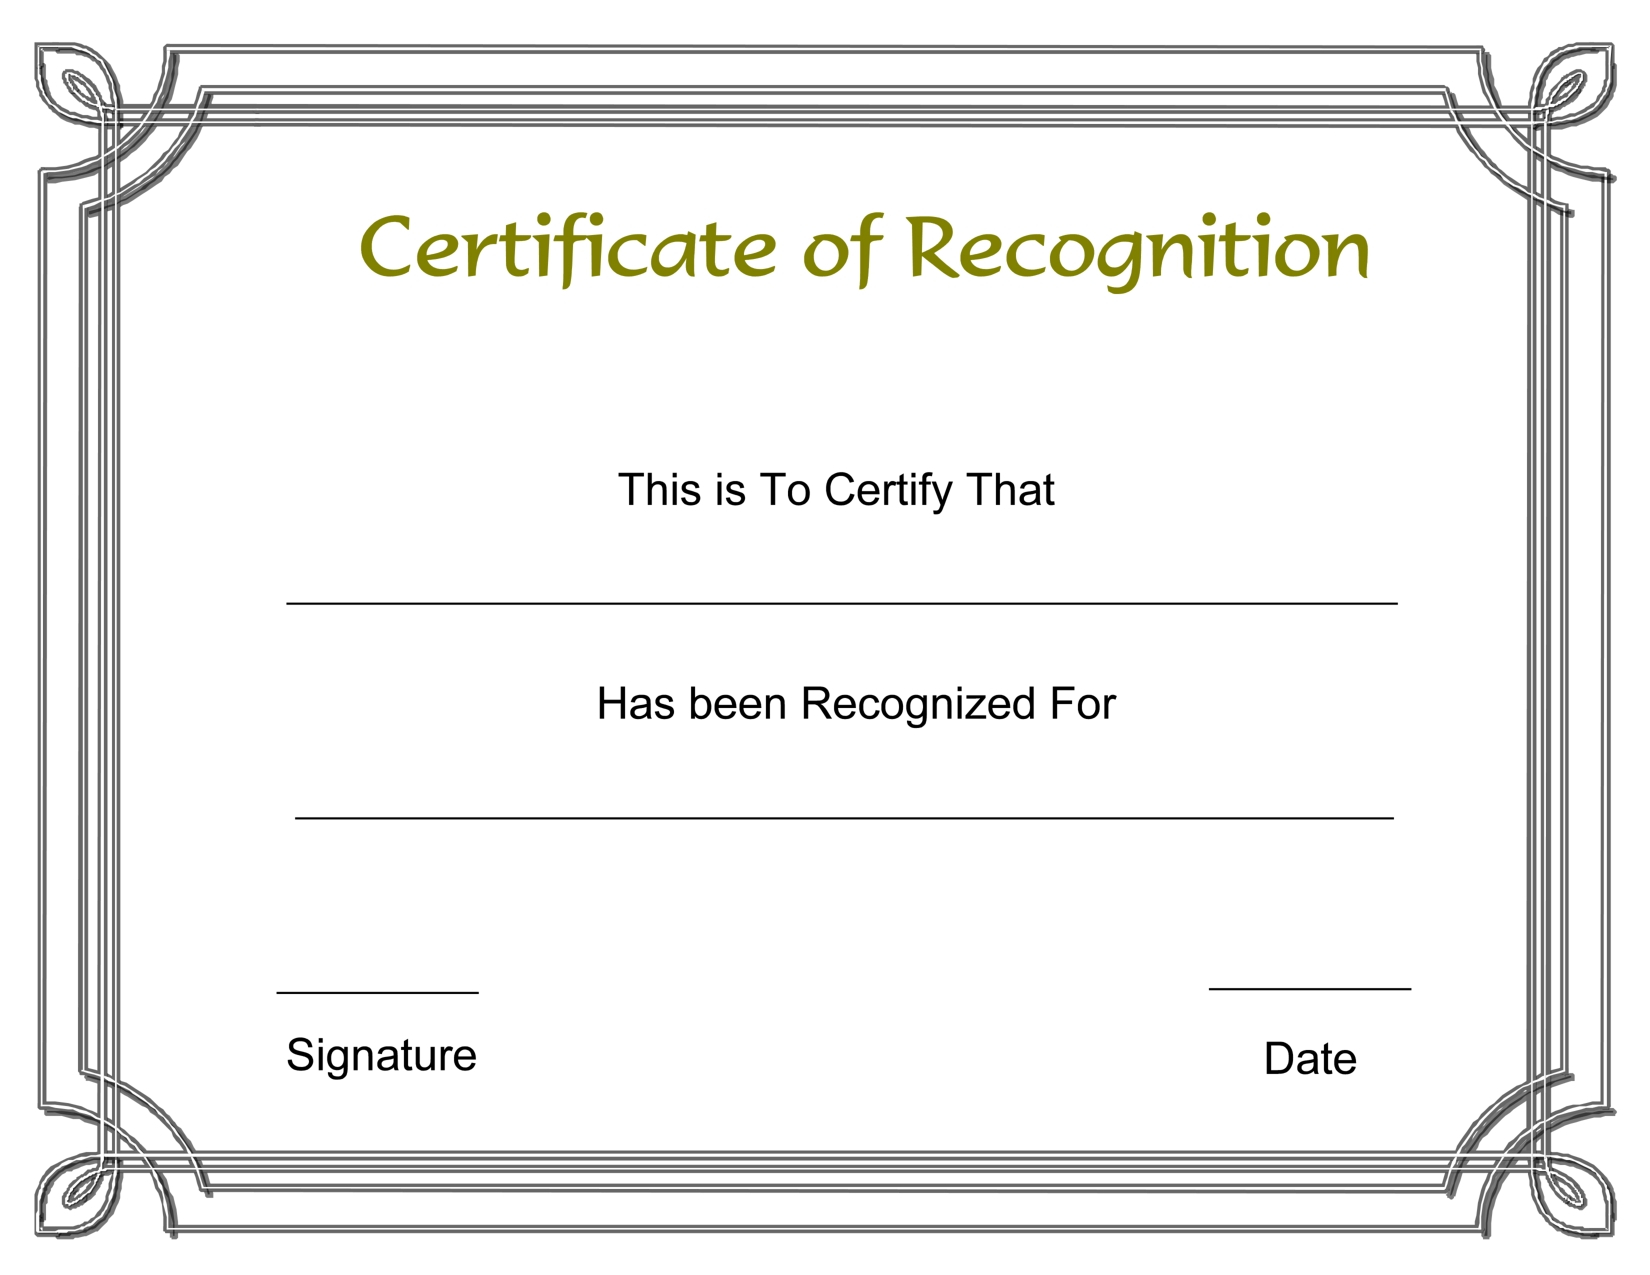 Certificate Template Recognition | Safebest.xyz Throughout Template For Recognition Certificate